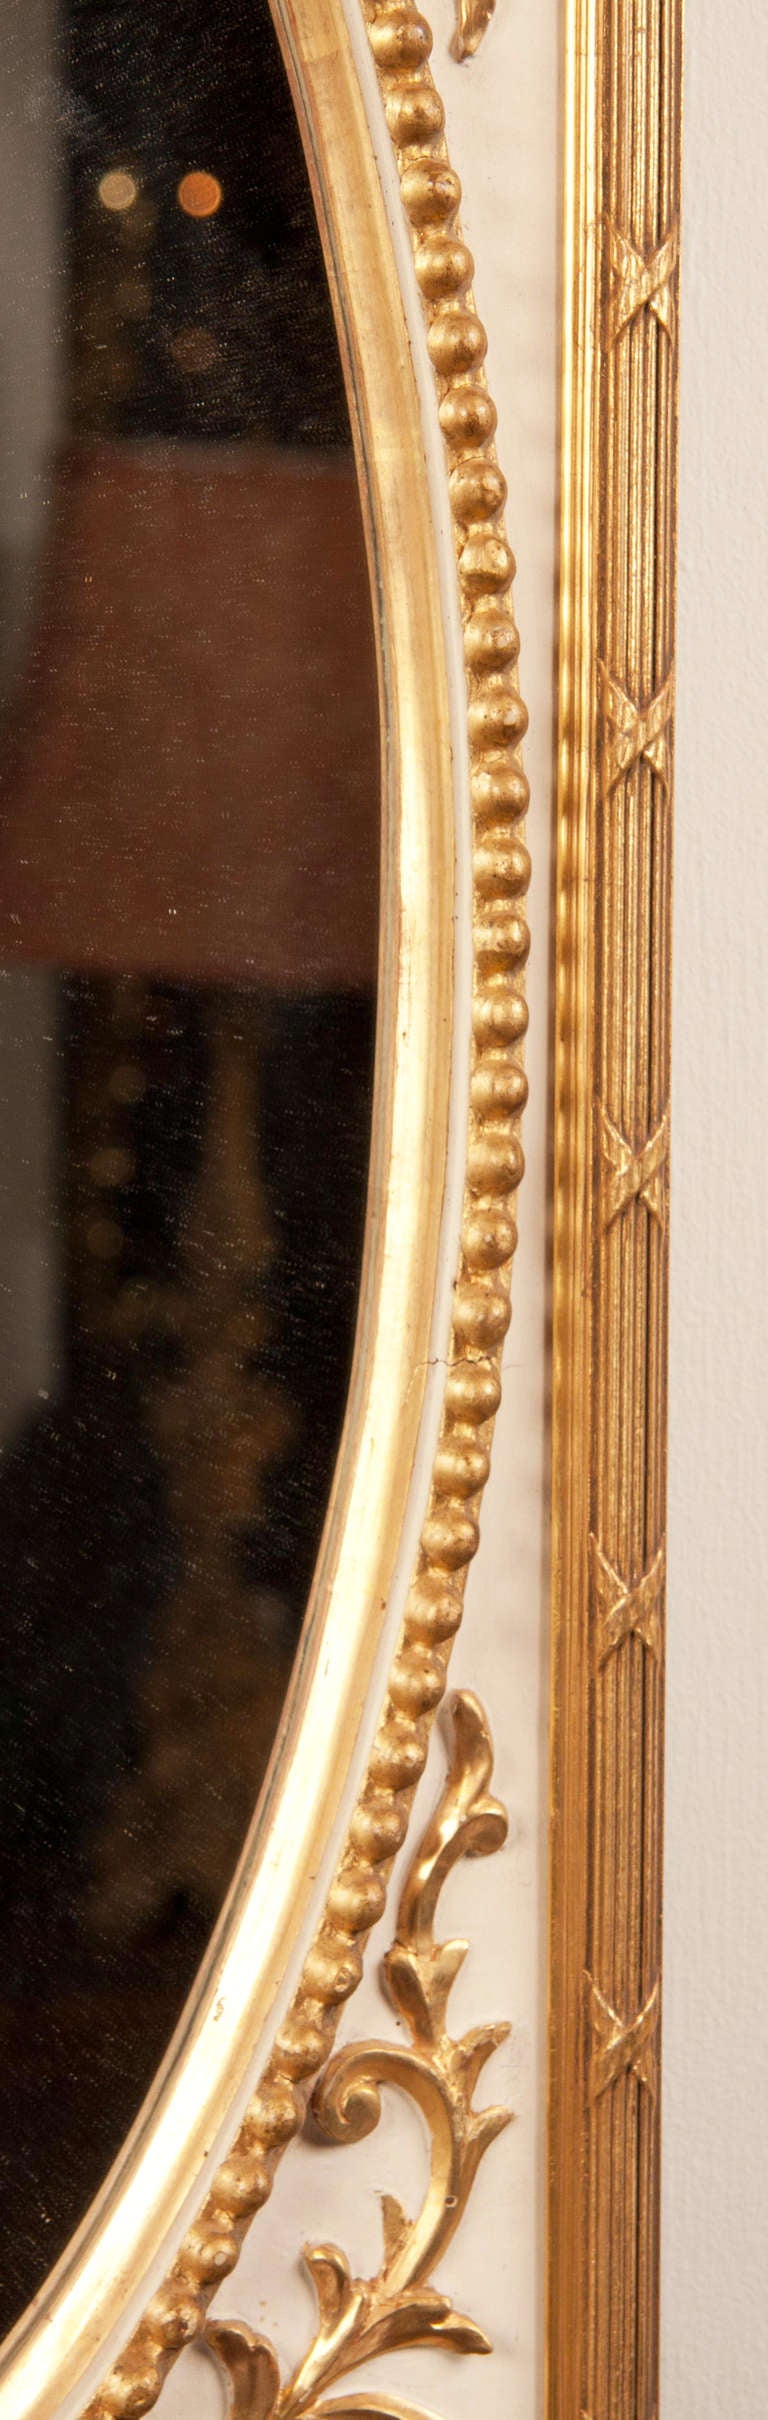 Pair of Neoclassical Parcel-Gilt Mirrors In Excellent Condition For Sale In Mississauga, ON